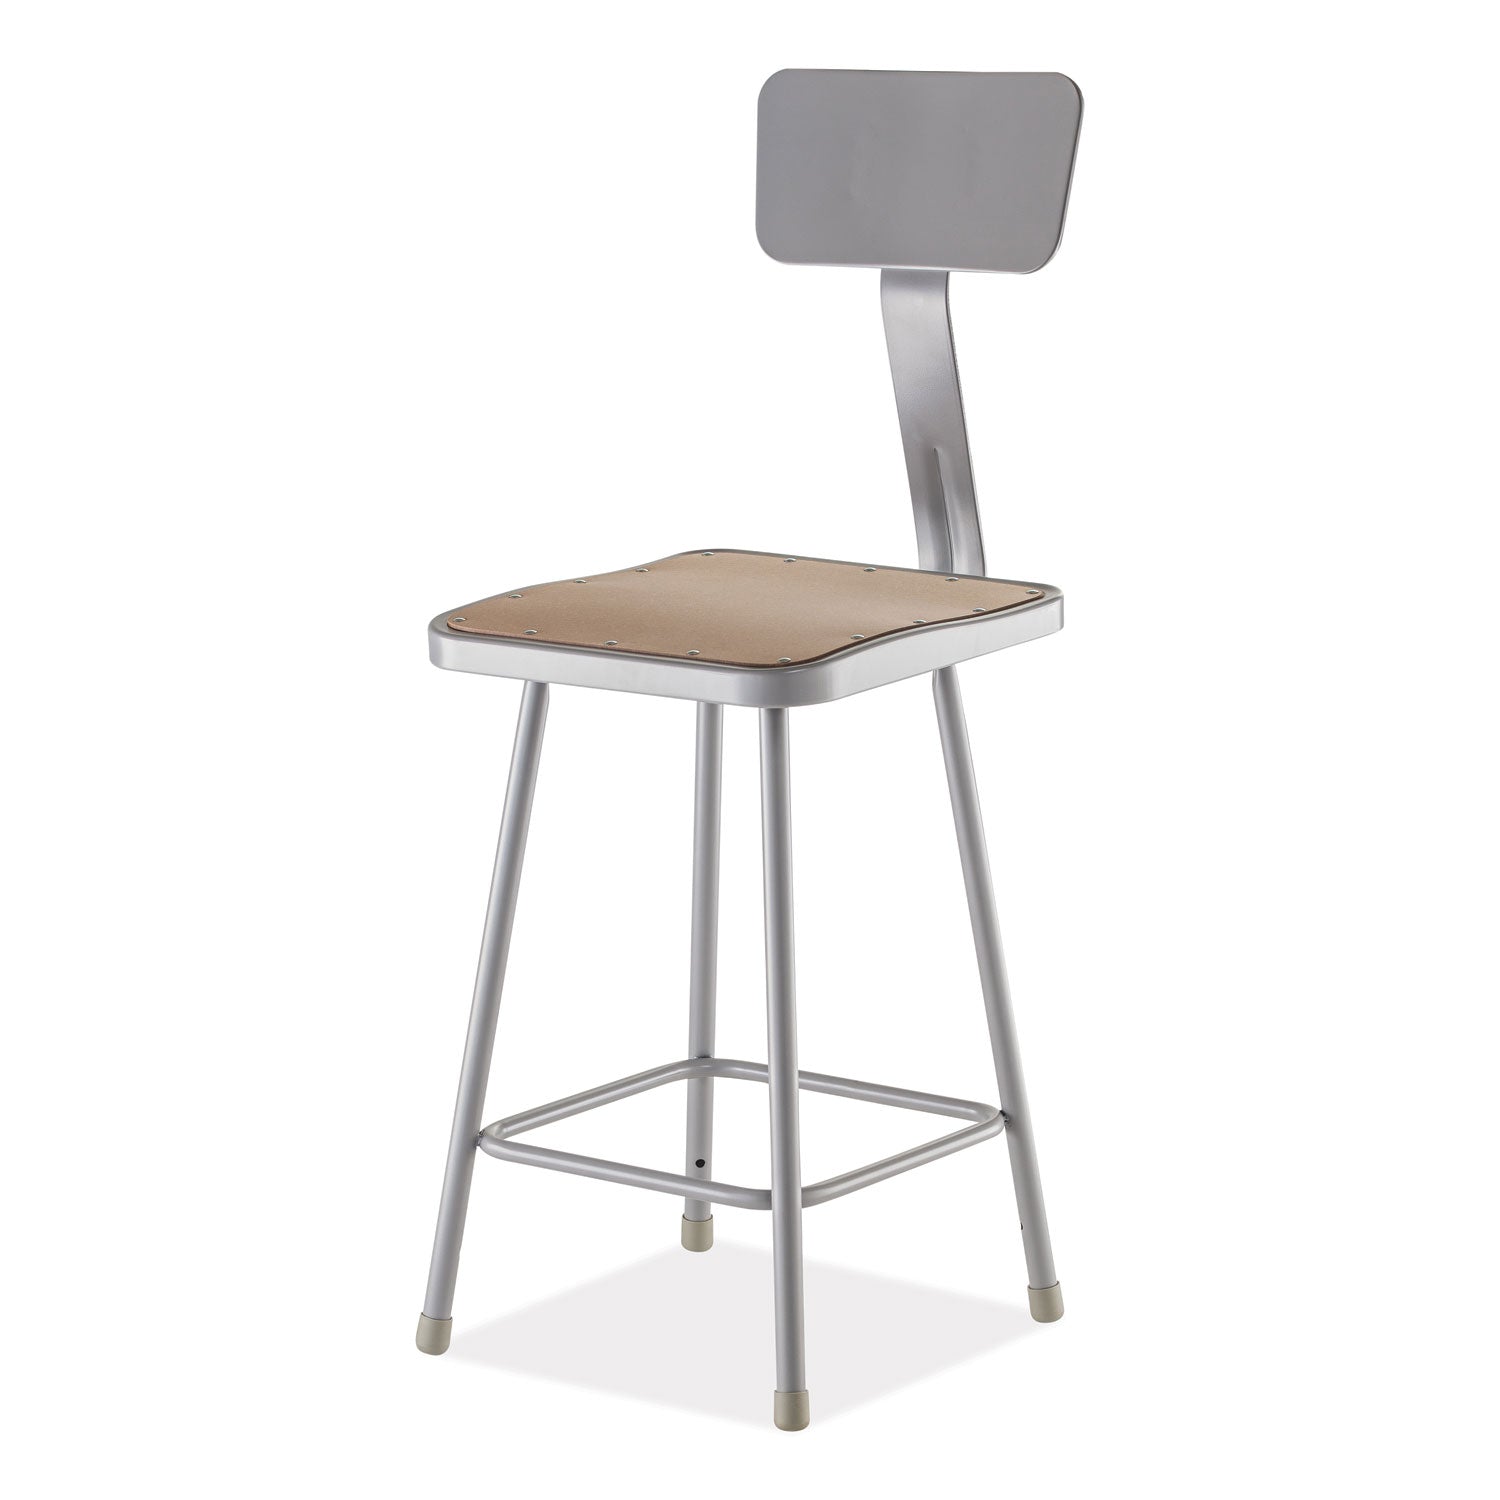 6300-series-hd-square-seat-stool-w-backrest-supports-500-lb-2325-seat-ht-brown-seatgray-back-baseships-in-1-3-bus-days_nps6324b - 2